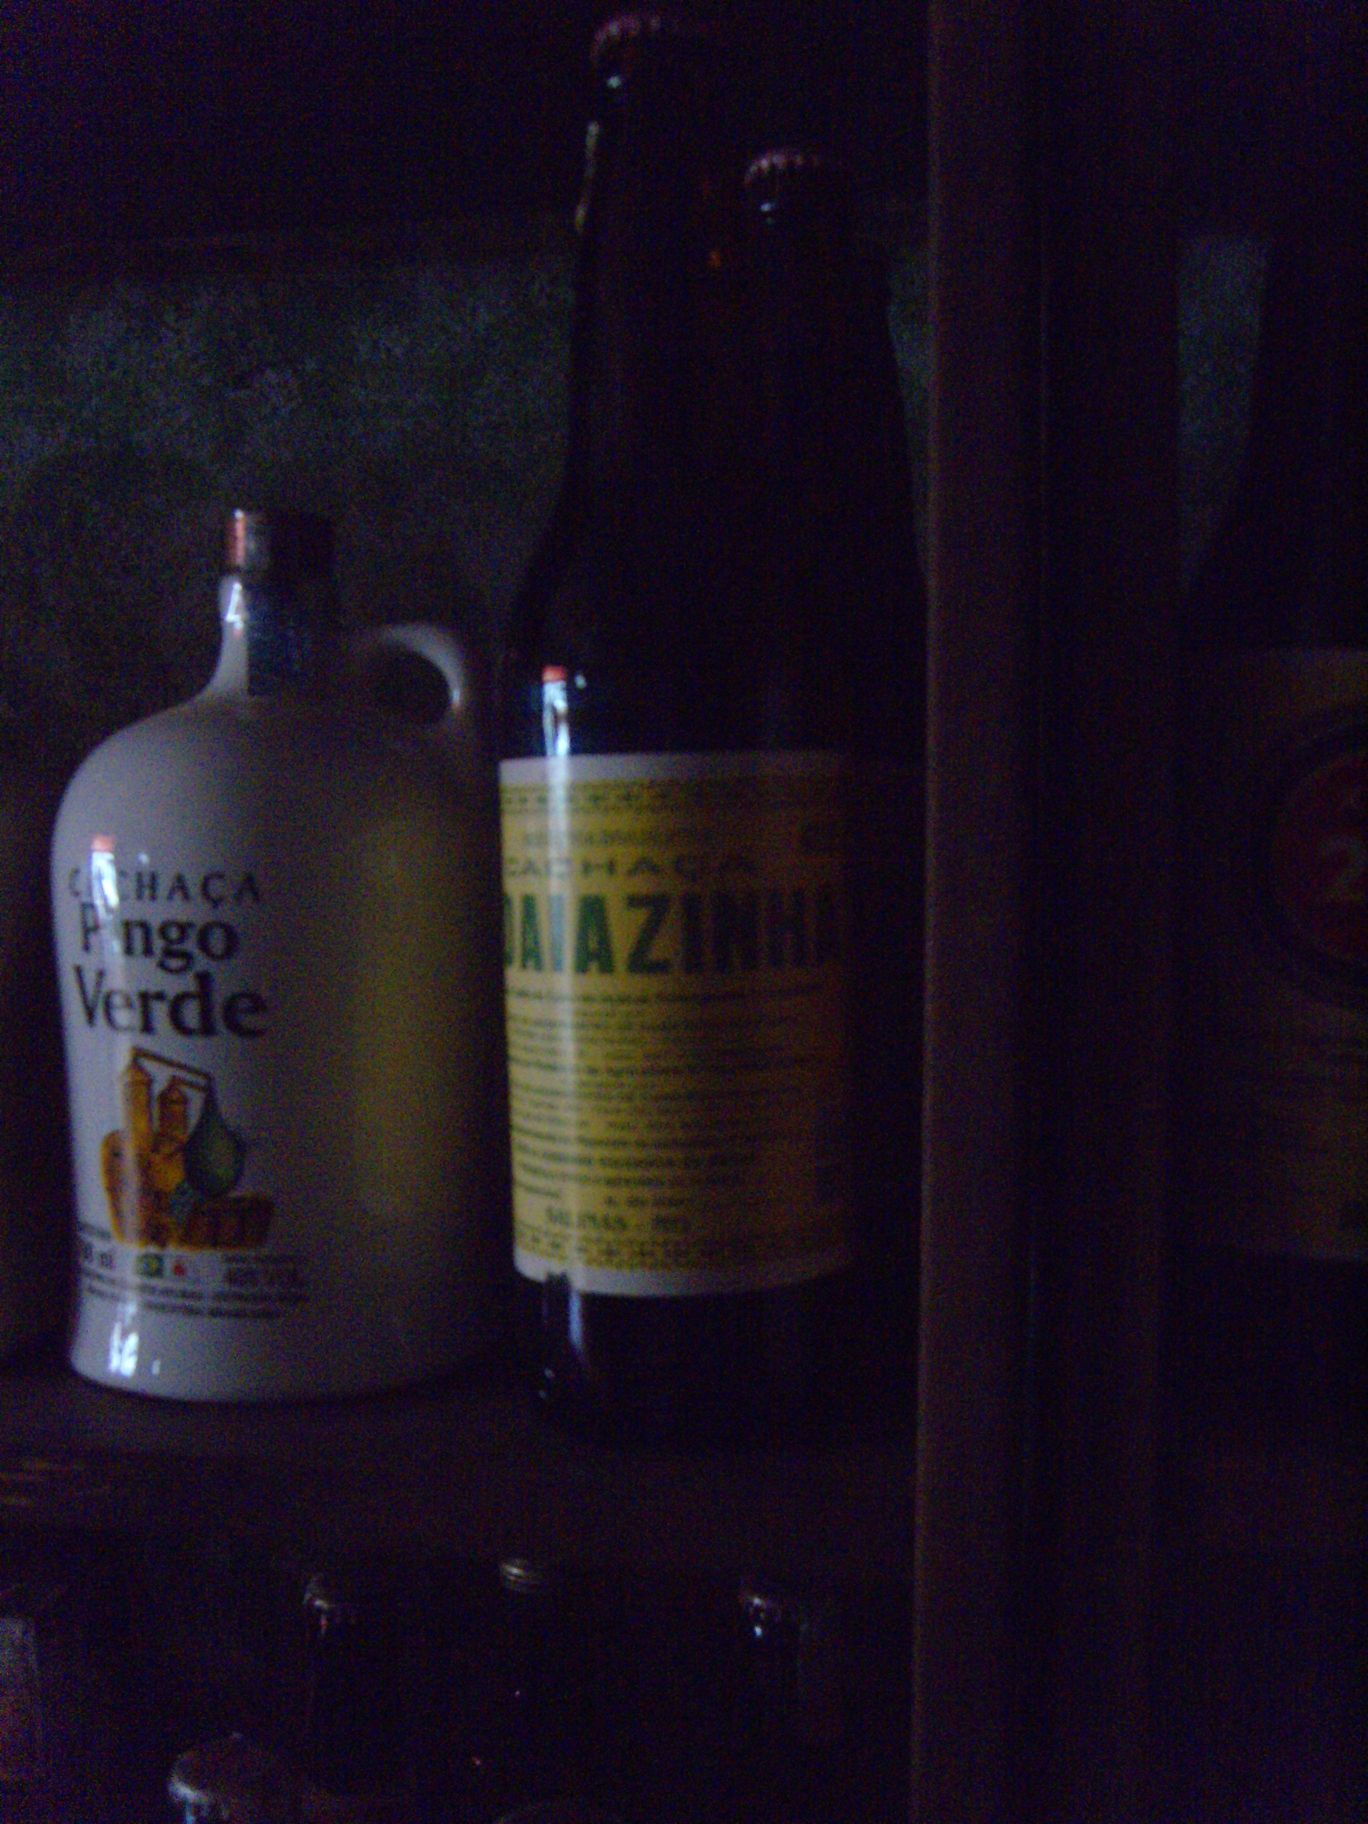 some bottles sit on a shelf and are lit up